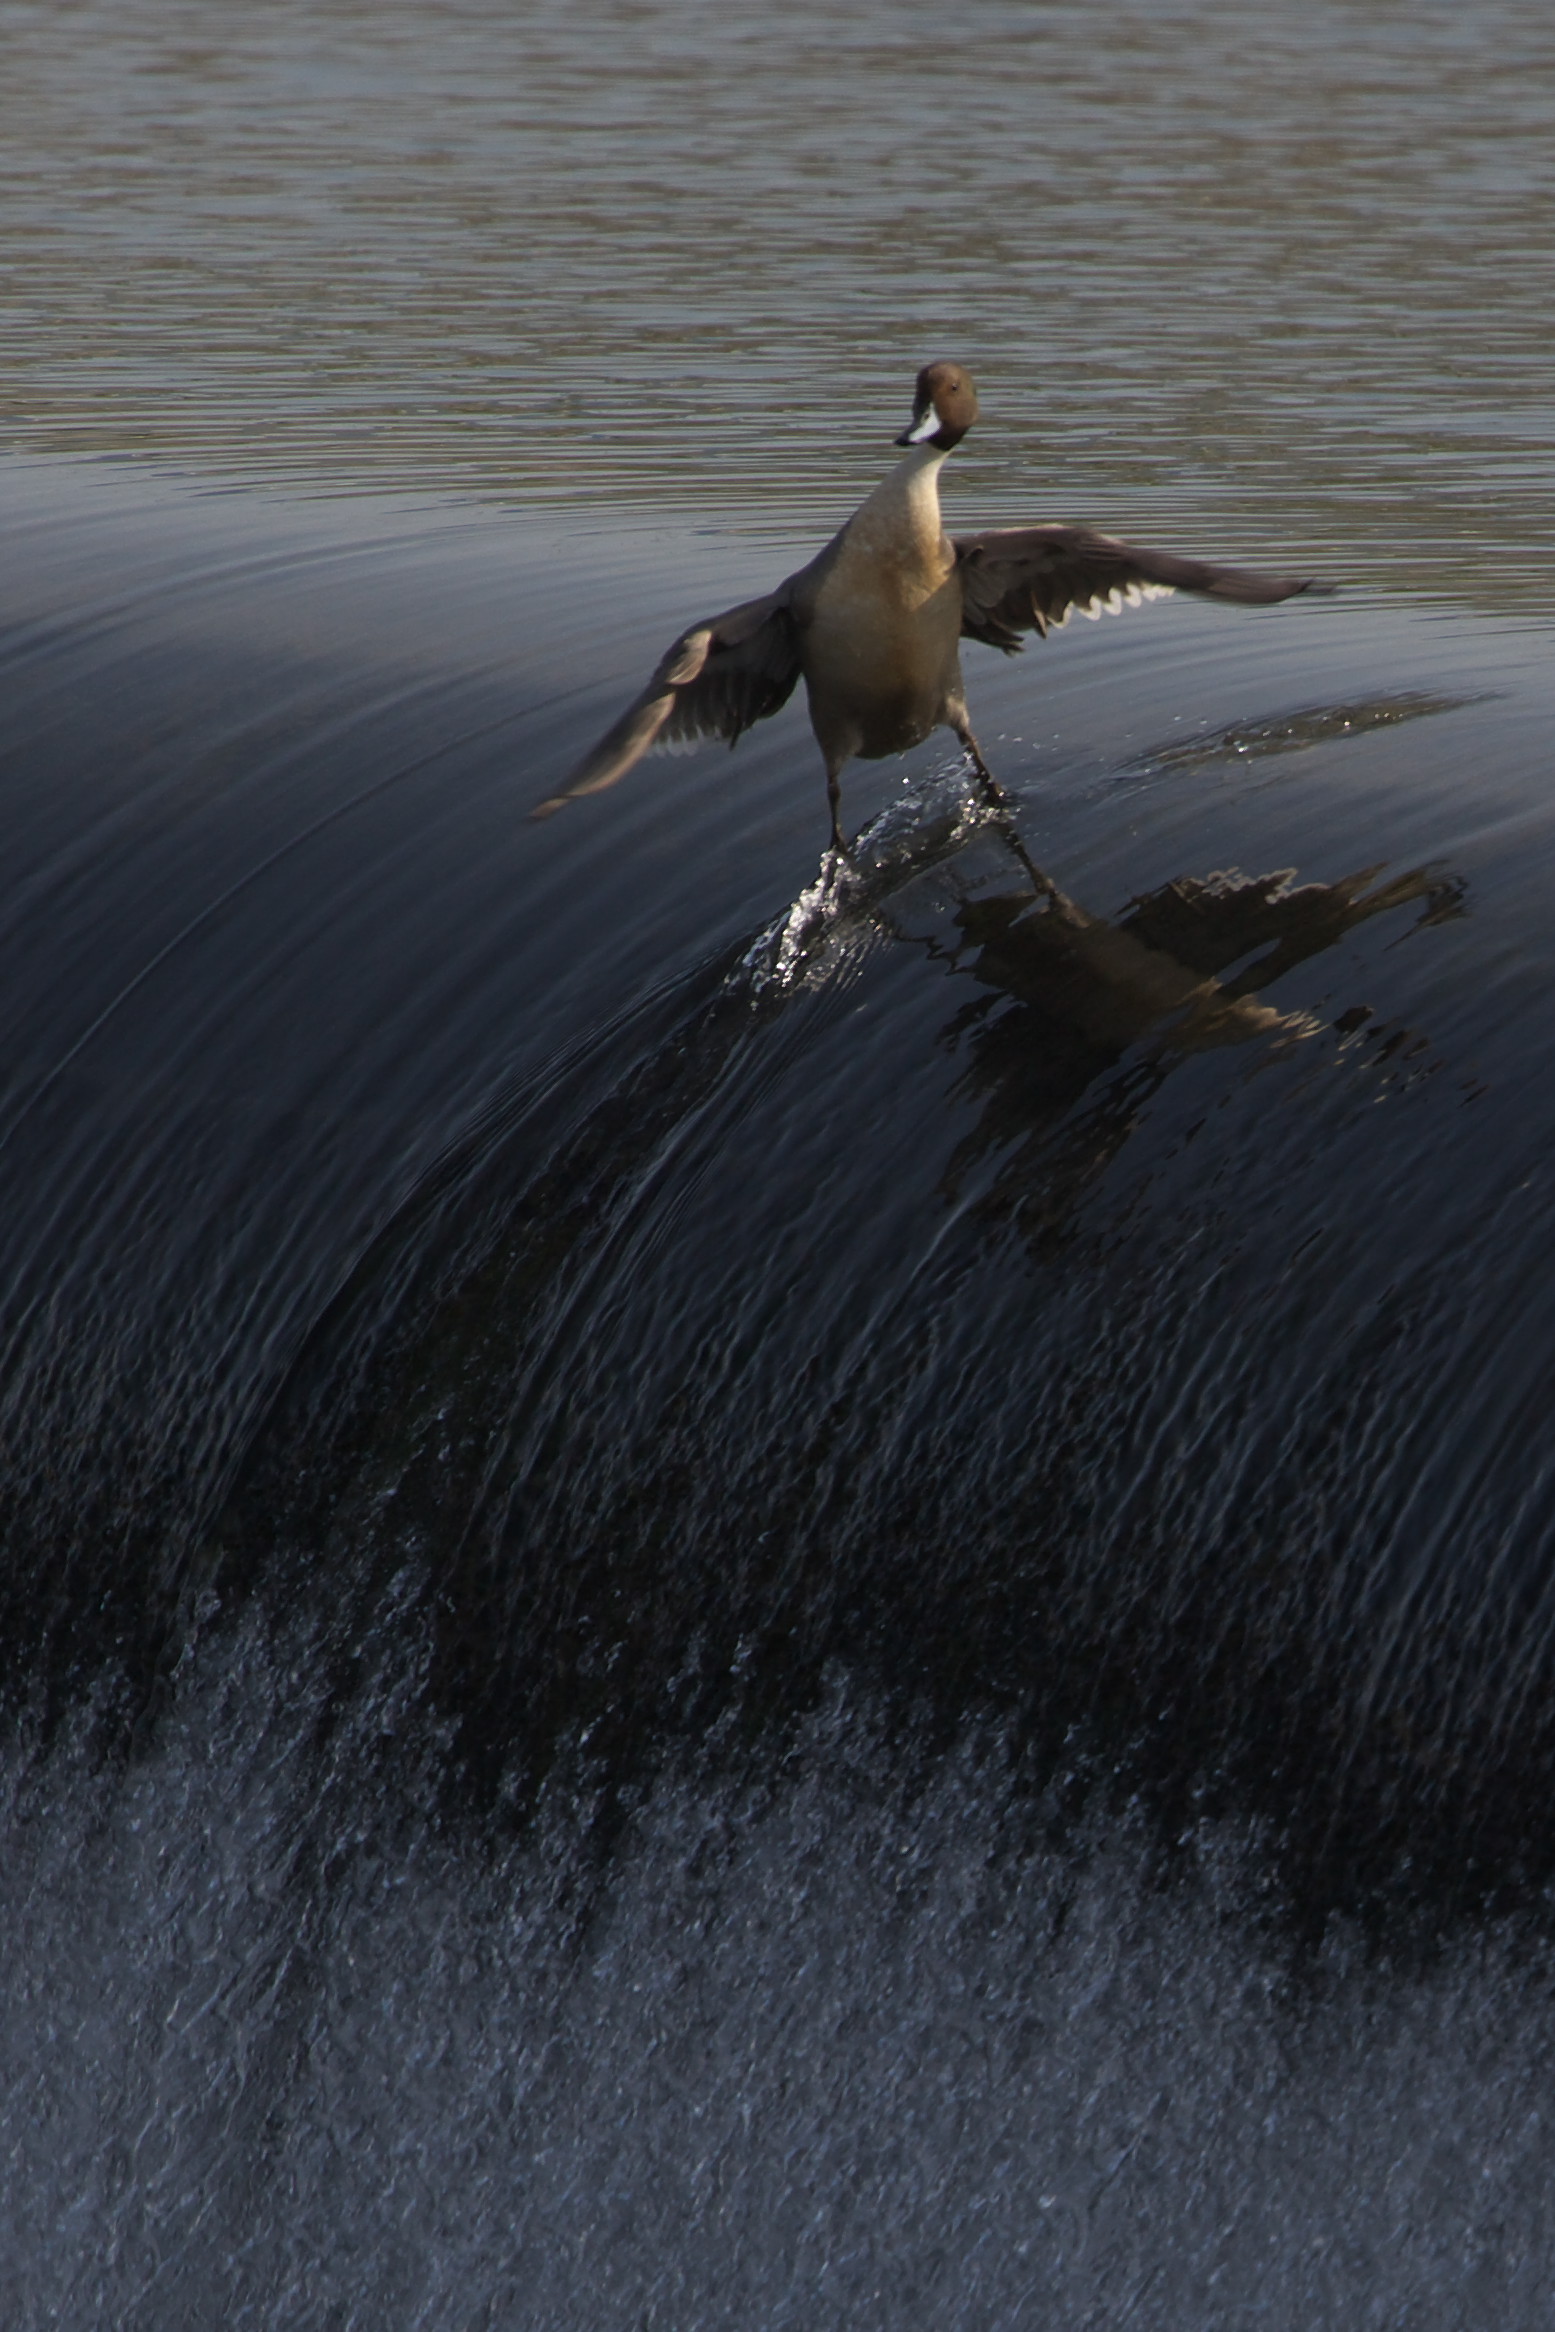 A duck on water